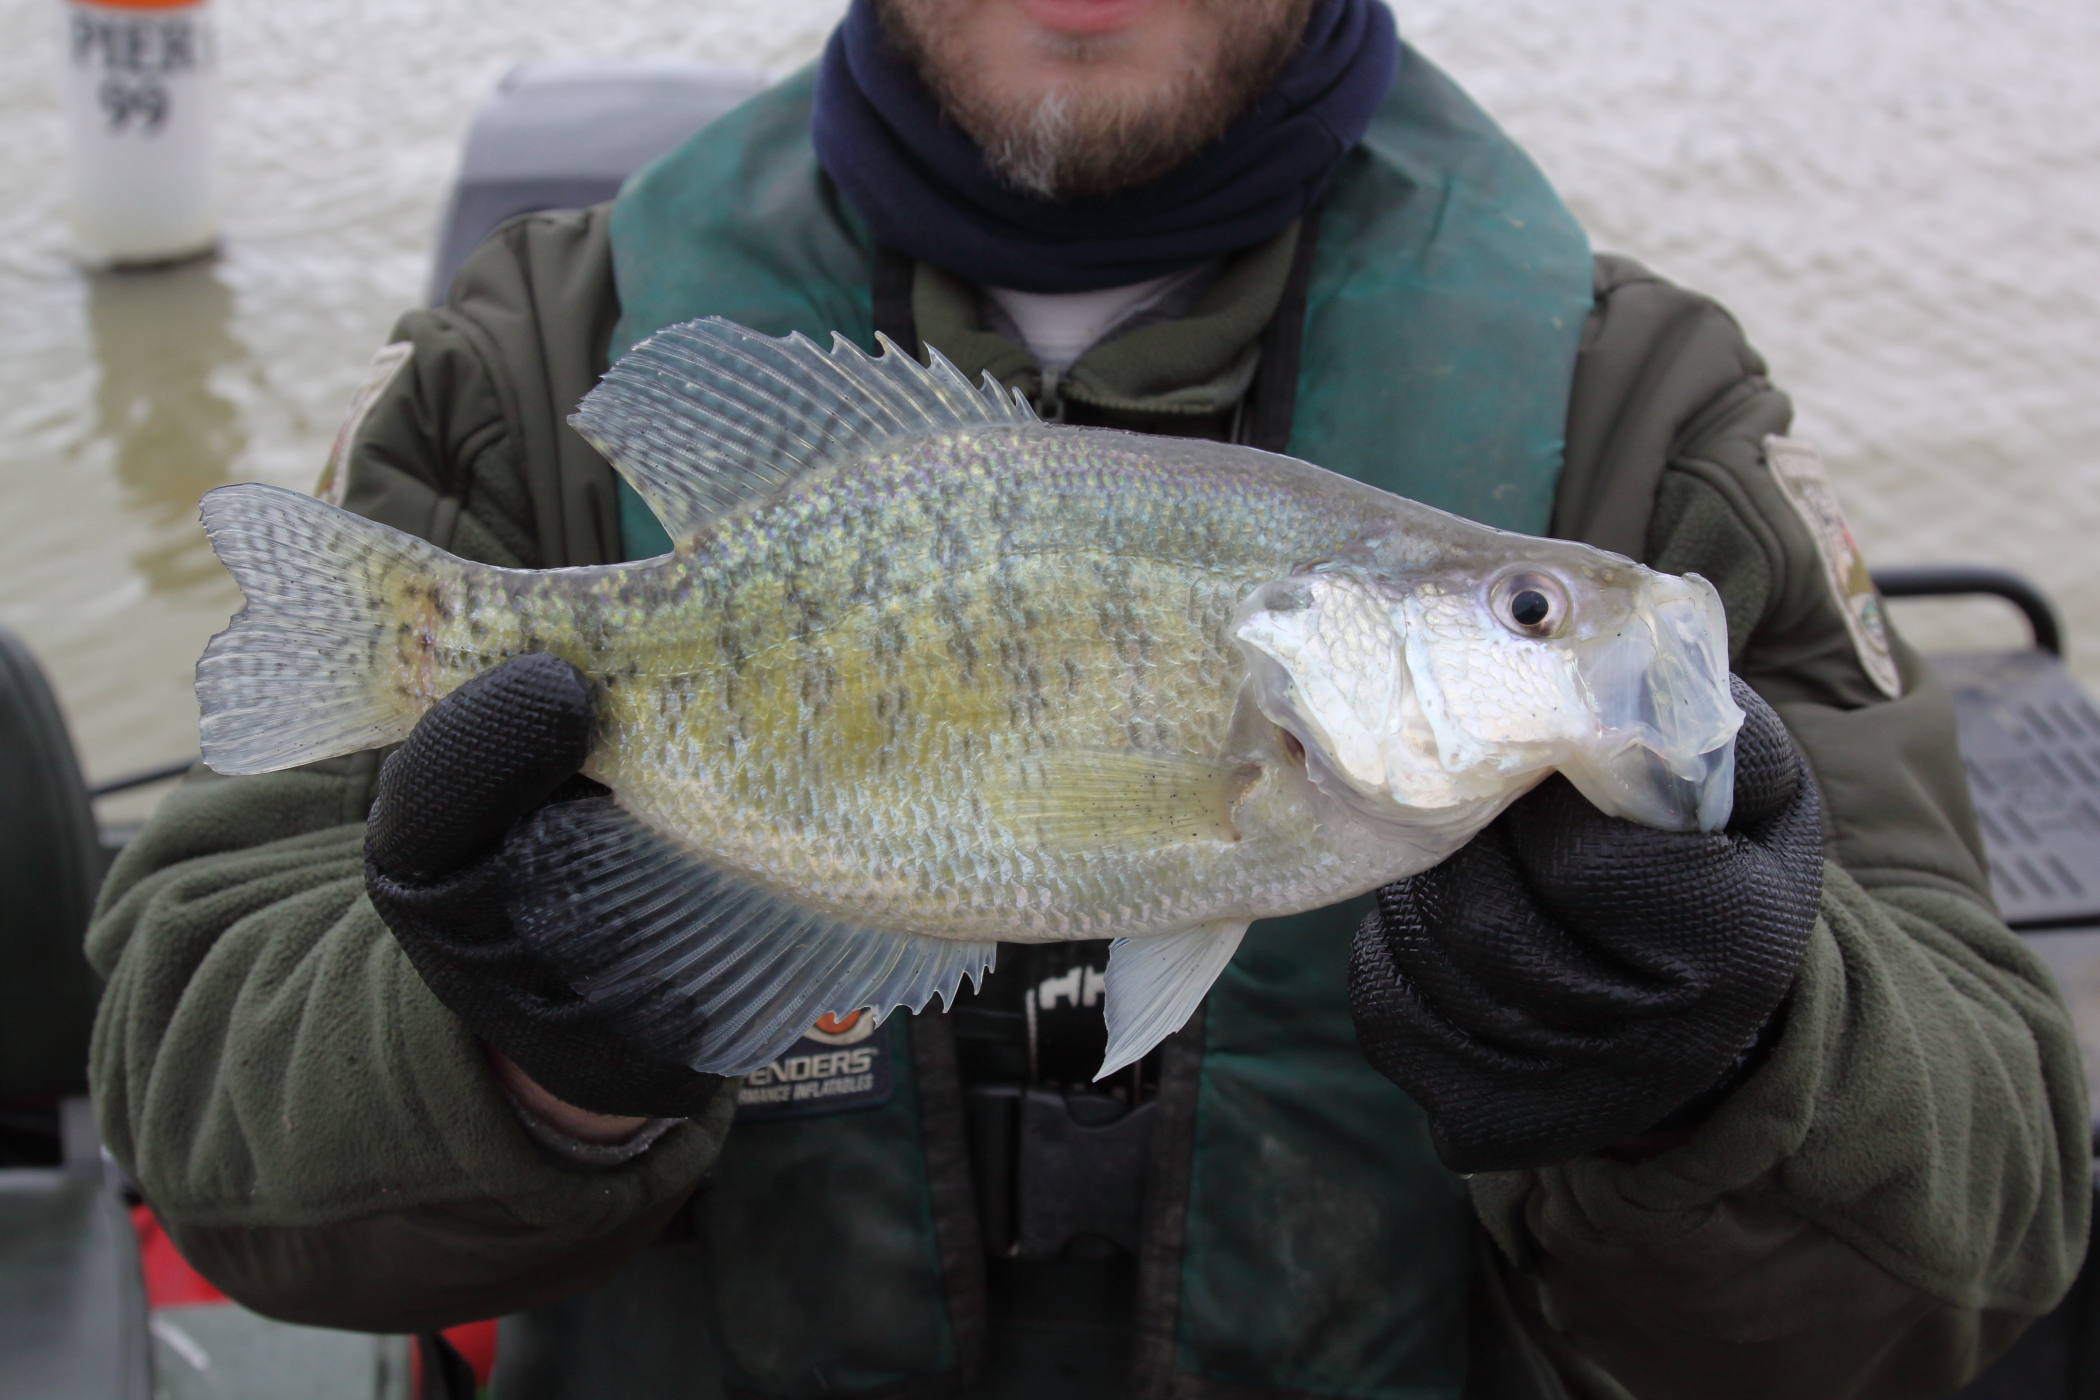 A person is holding up a large crappie